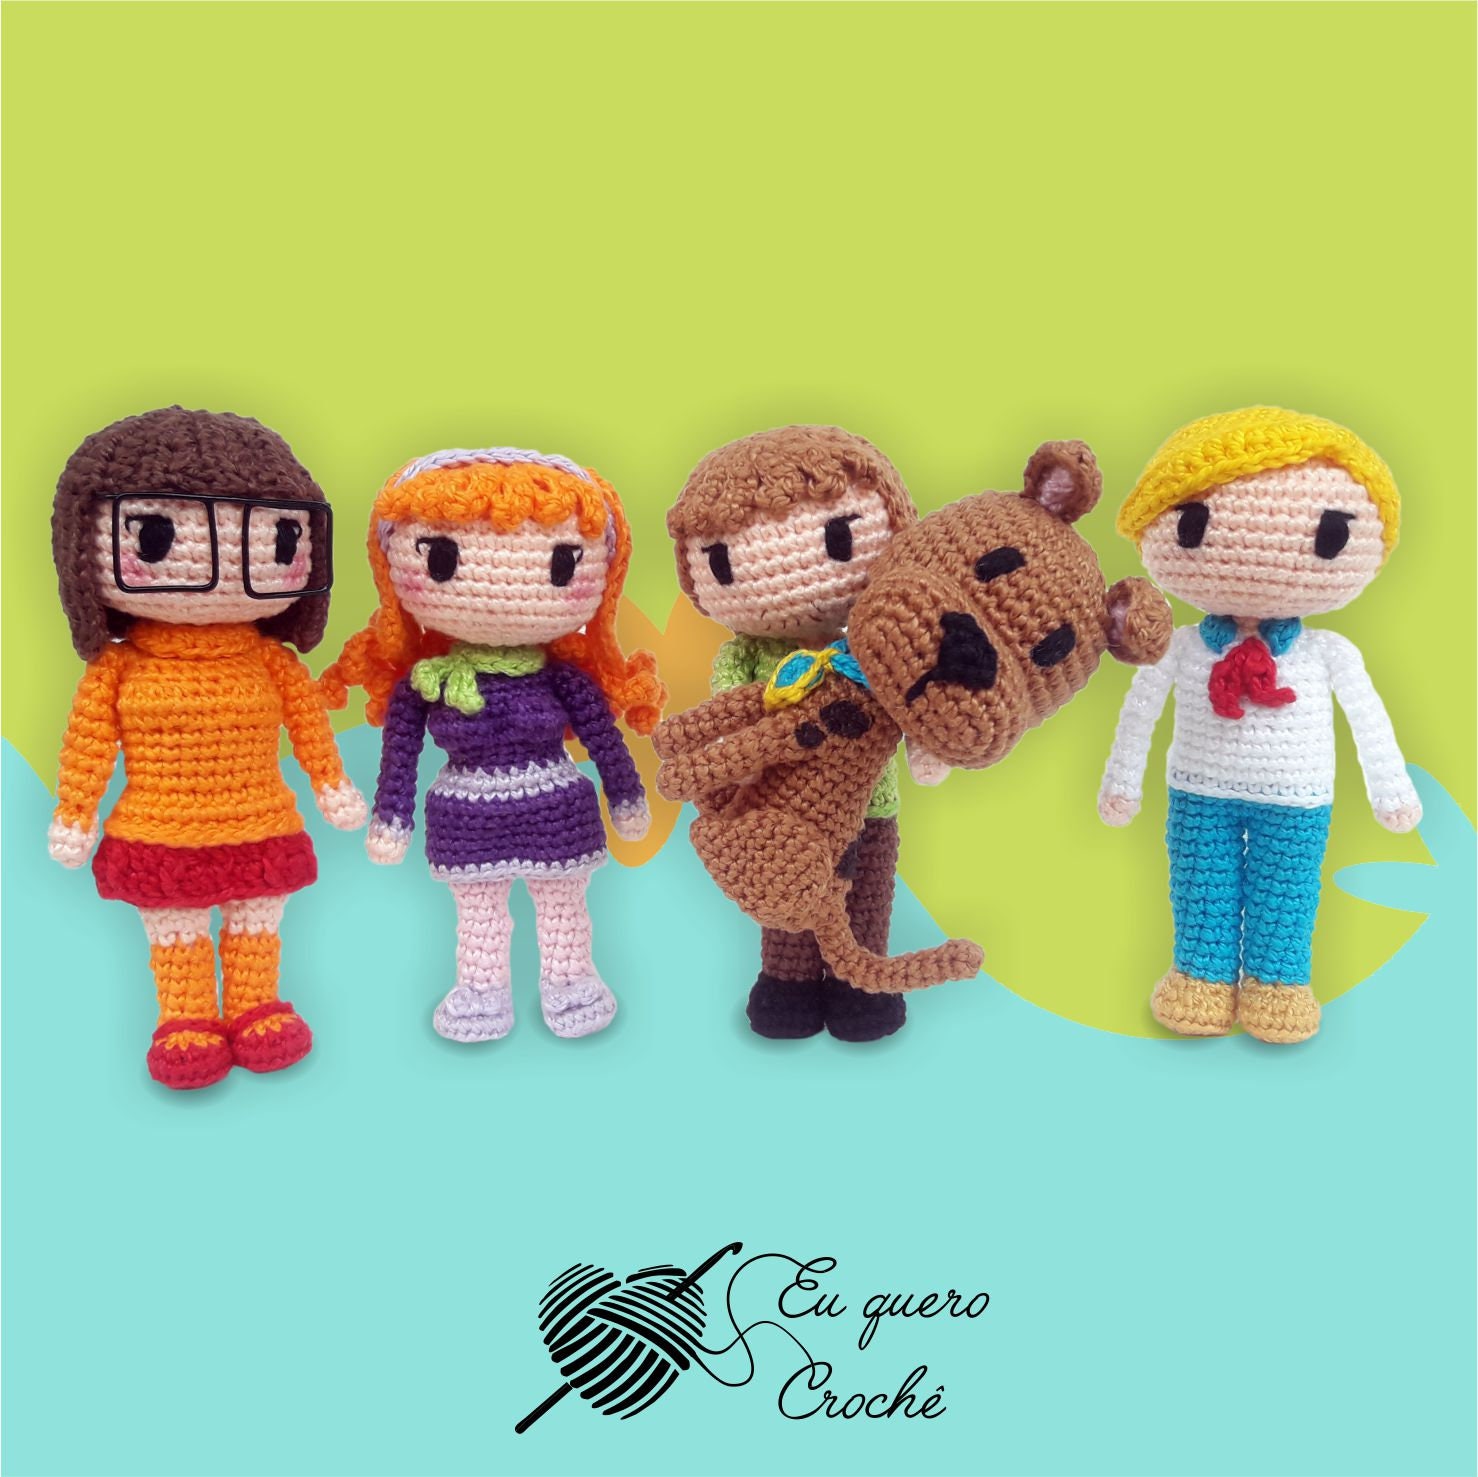 Scooby Doo inspired - Crochet Plush Toy – Simply Yarn Co.